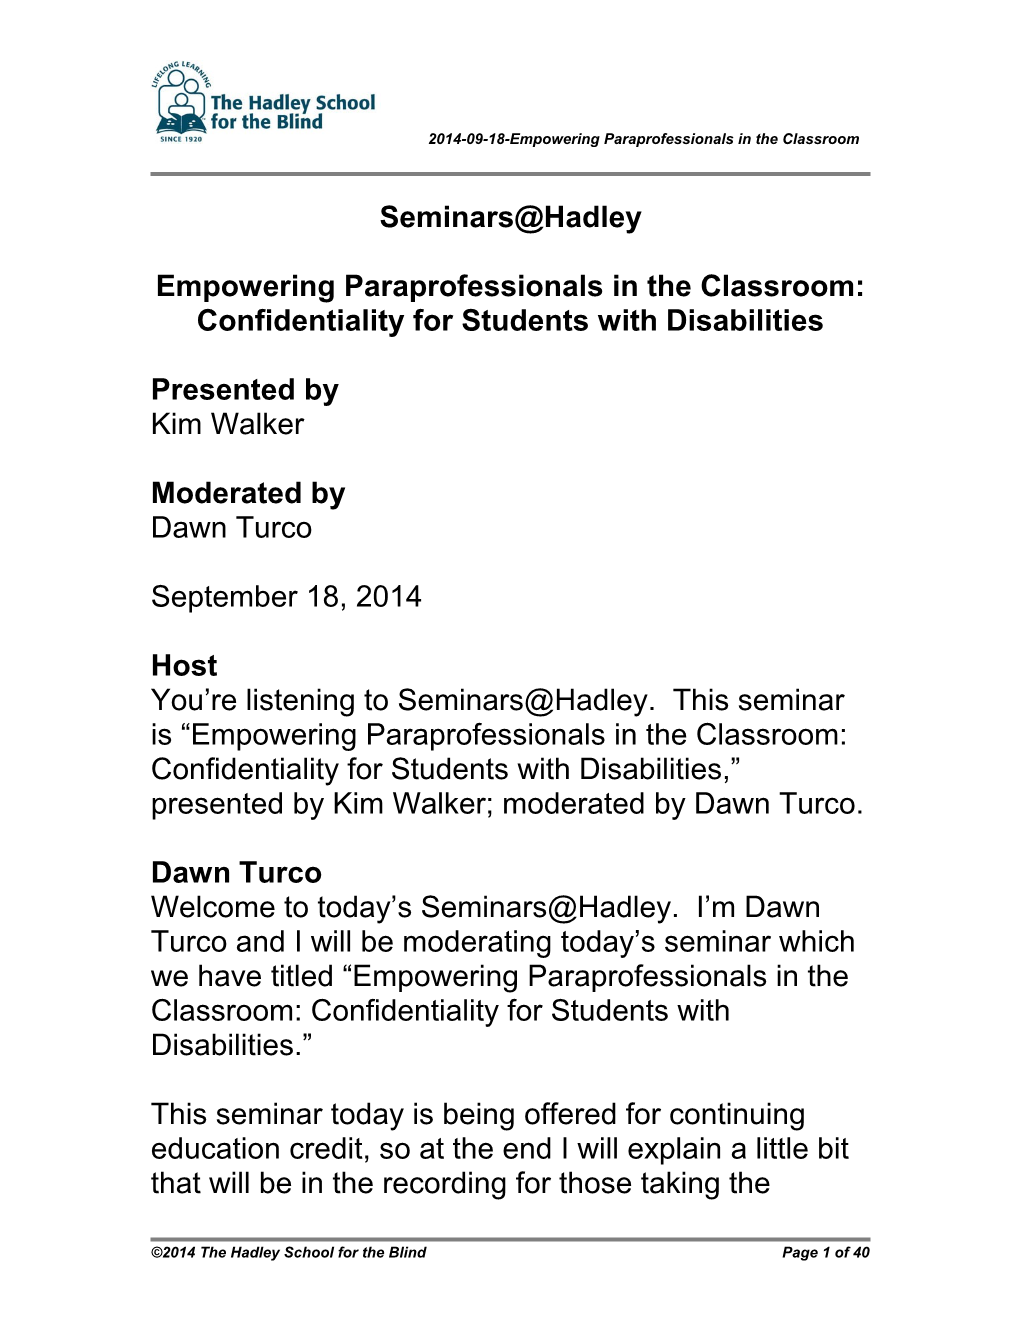 2014-09-18-Empowering Paraprofessionals in the Classroom Confidentiality for Students With